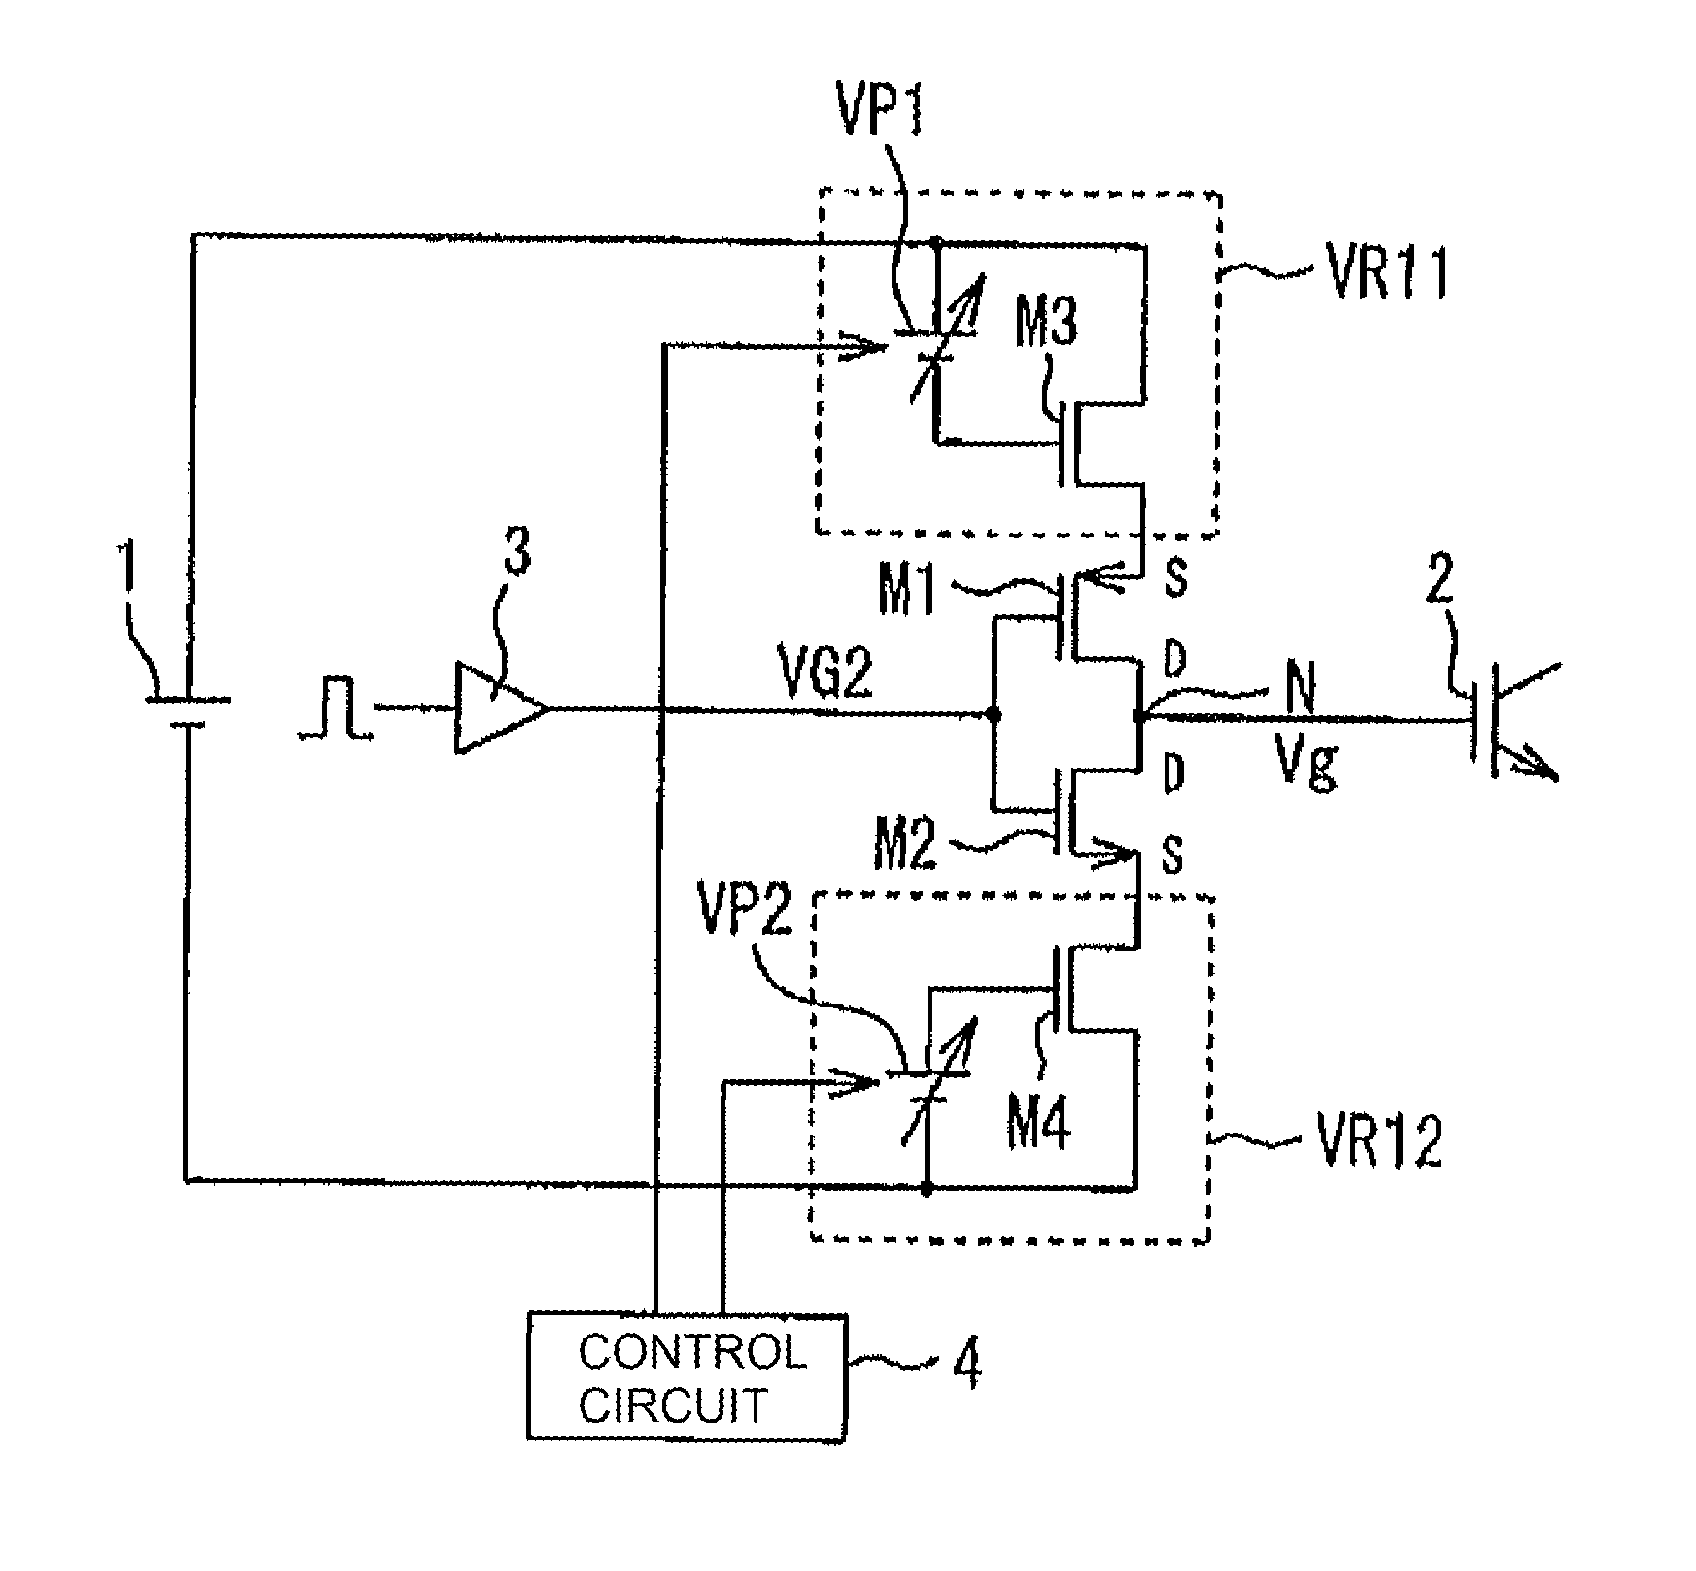 Voltage controlled switching element gate drive circuit